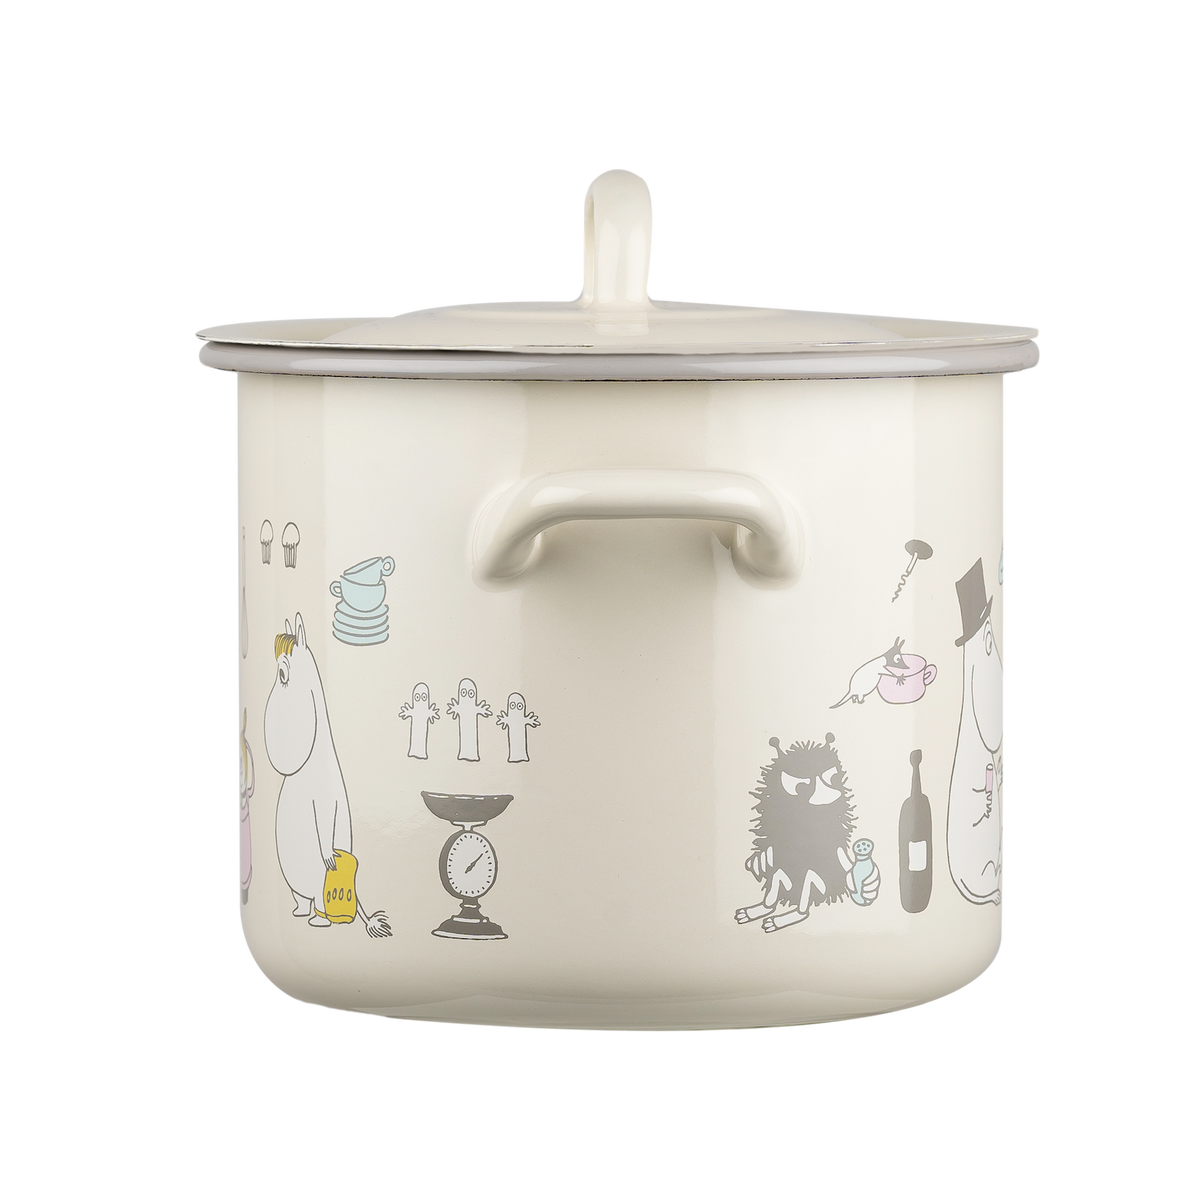 Moomin by Muurla, Bon Appétit Enamel Cooking Pot with Lid, 2.5 L, made in carbon steel enamelware 